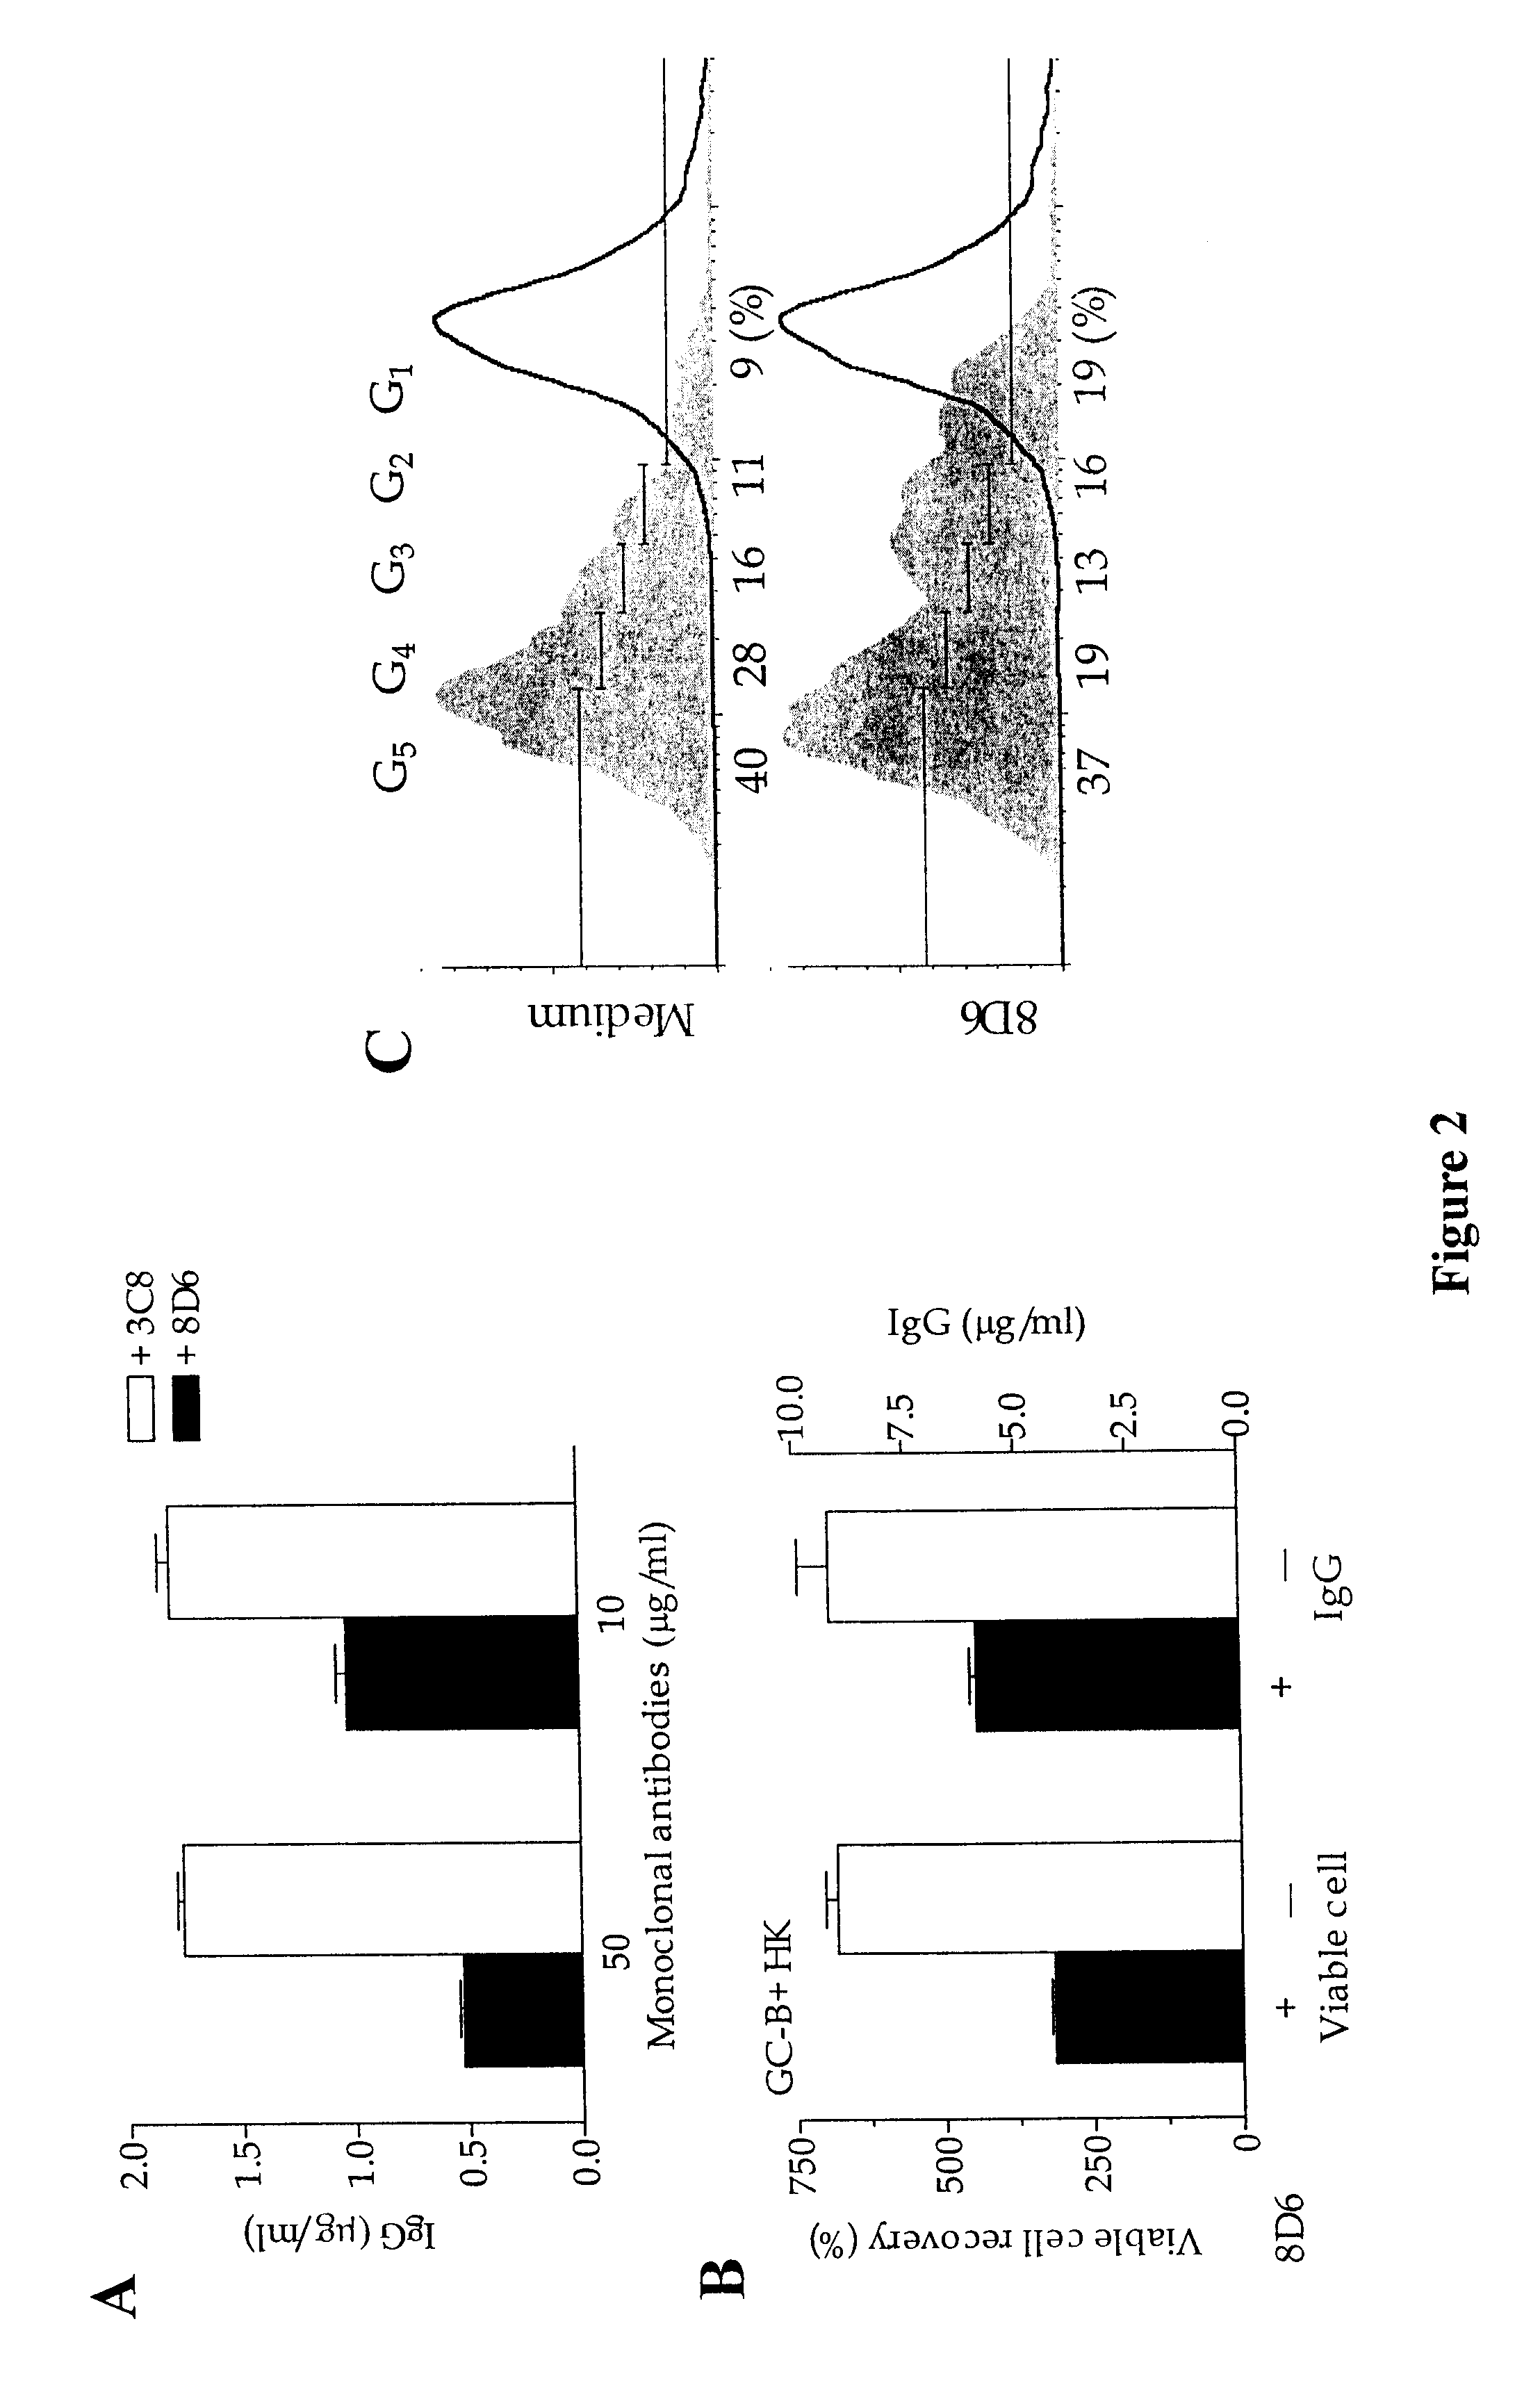 Monoclonal antibodies that suppress B cell growth and/or differentiation